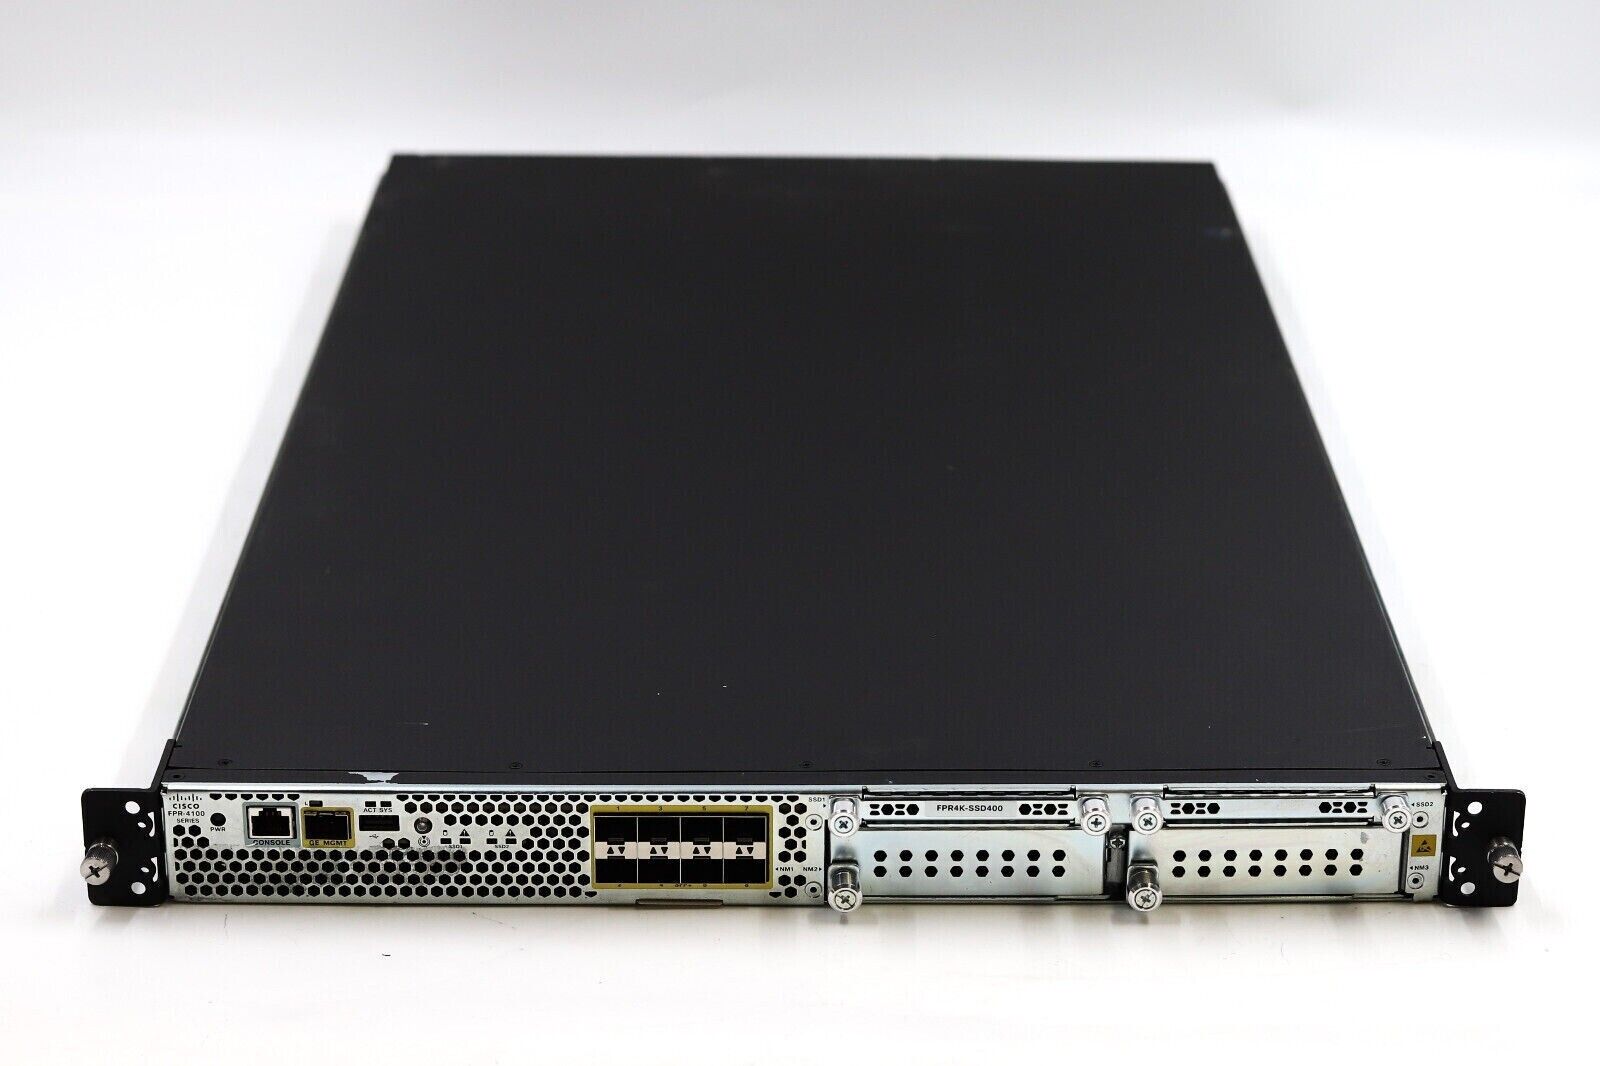 Cisco FPR-4150-K9 4100-Series Firepower 4150 Security Appliance Tested